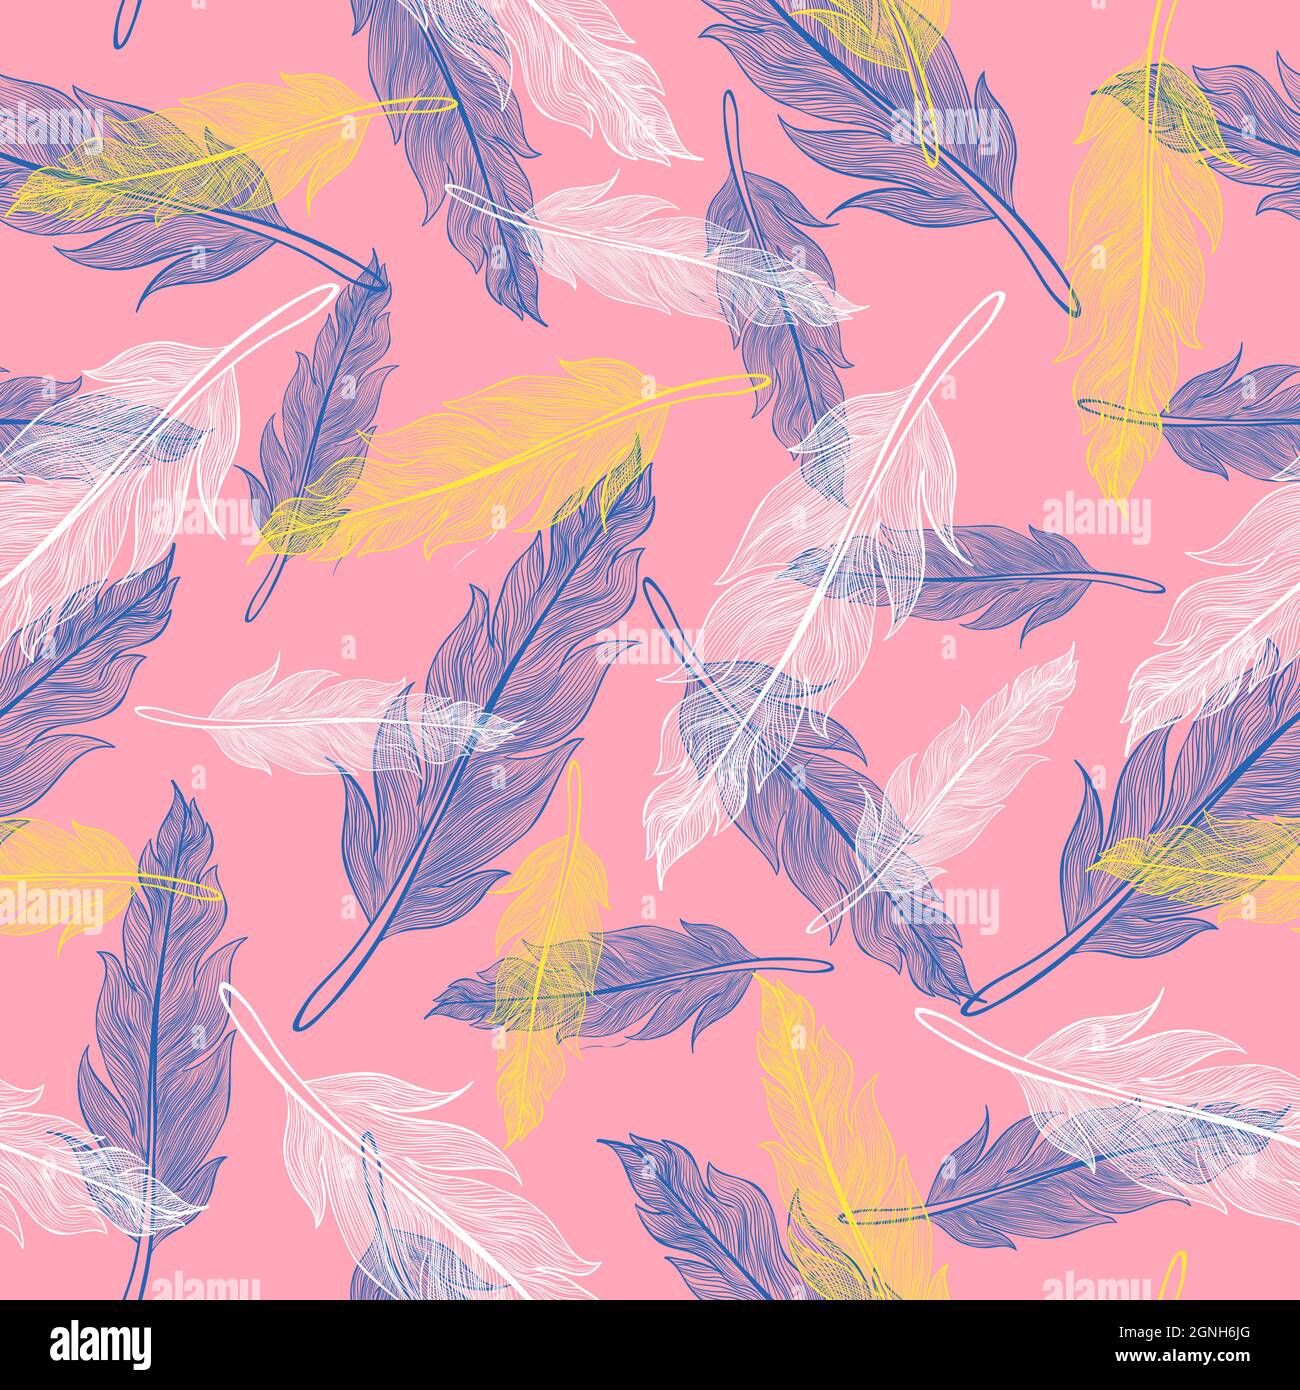 Vector vintage seamless feather pattern. Retro pattern with colorful feathers. Vintage vector feather texture. Stock Vector